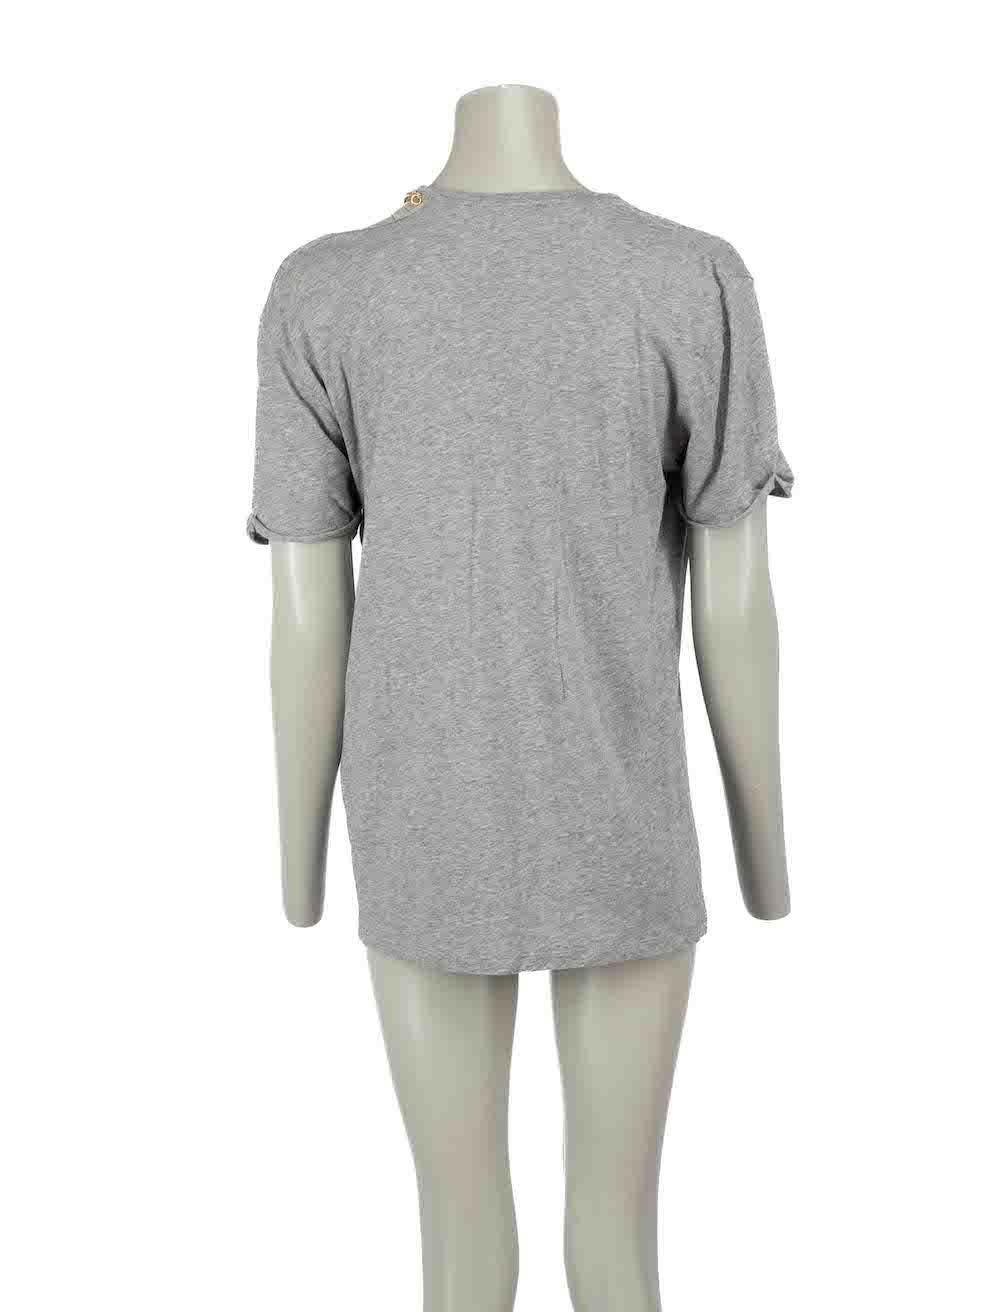 Stella McCartney Grey Distress Falabella T-Shirt Size M In Good Condition For Sale In London, GB